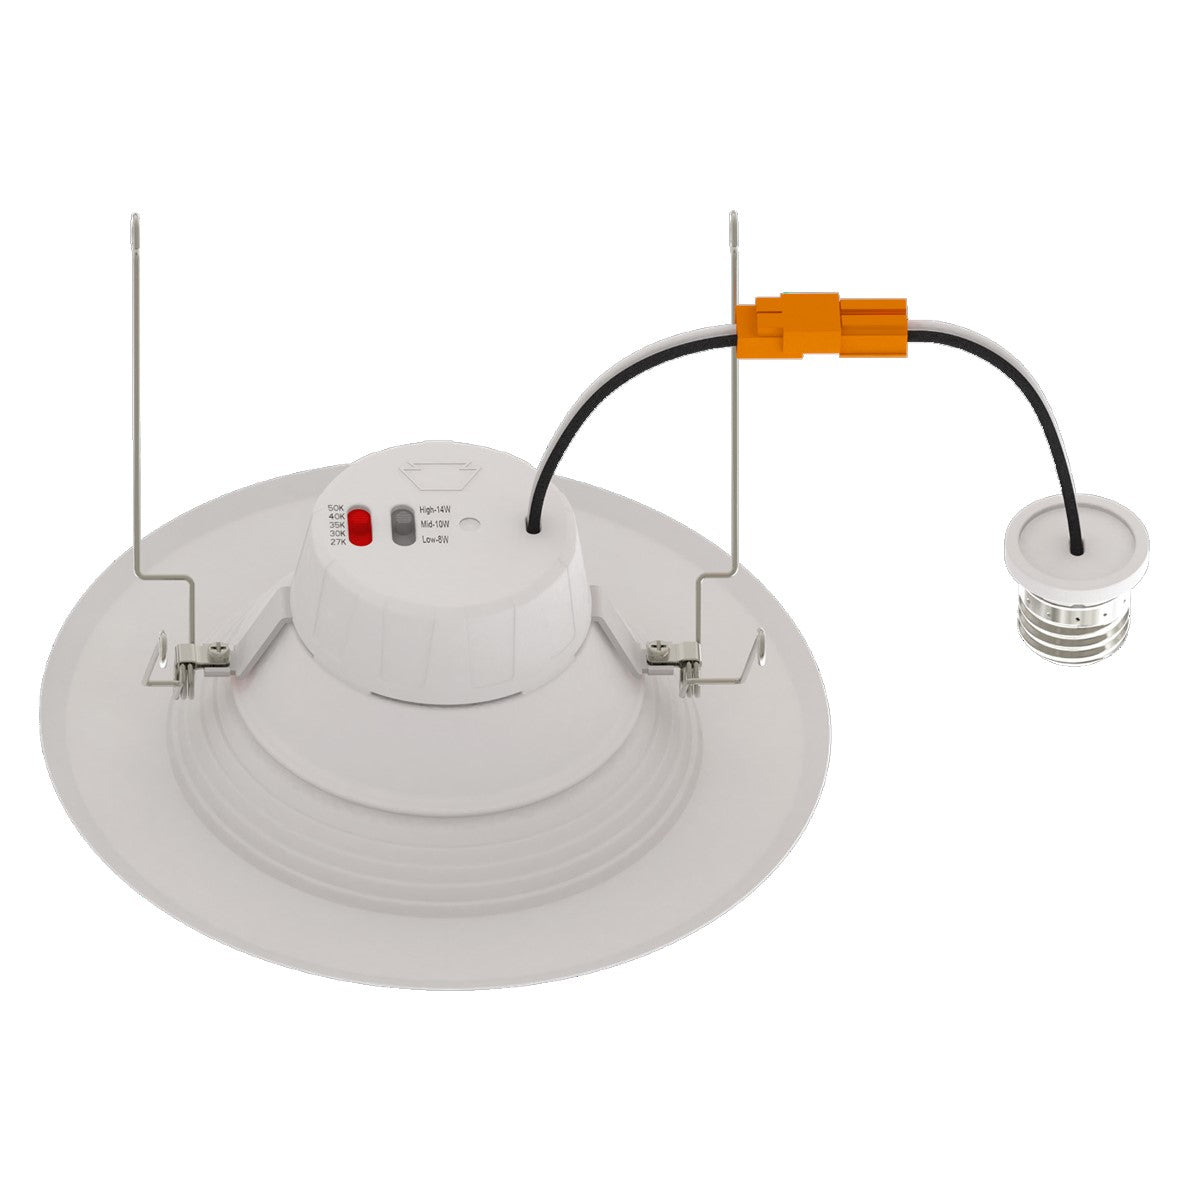 6 In. Aiva Retrofit LED Can Light, Power Select, 1250 Lumens, Selectable CCT, 2700K to 5000K, Baffle Trim